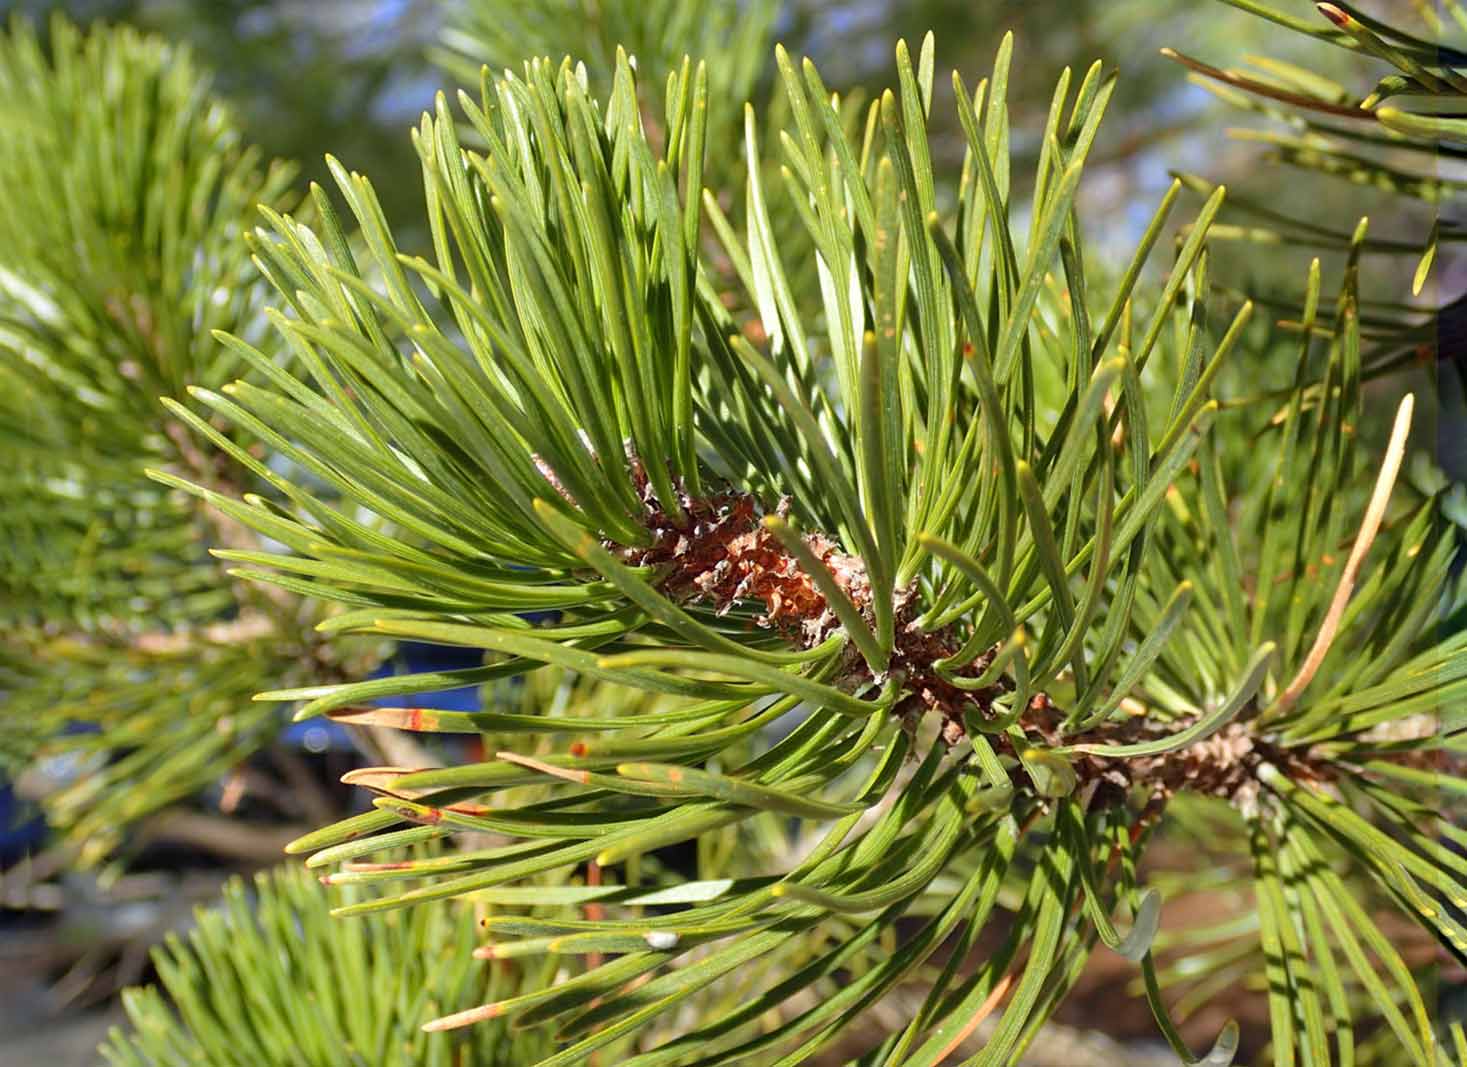 A picture of a pine tree with tips for identification